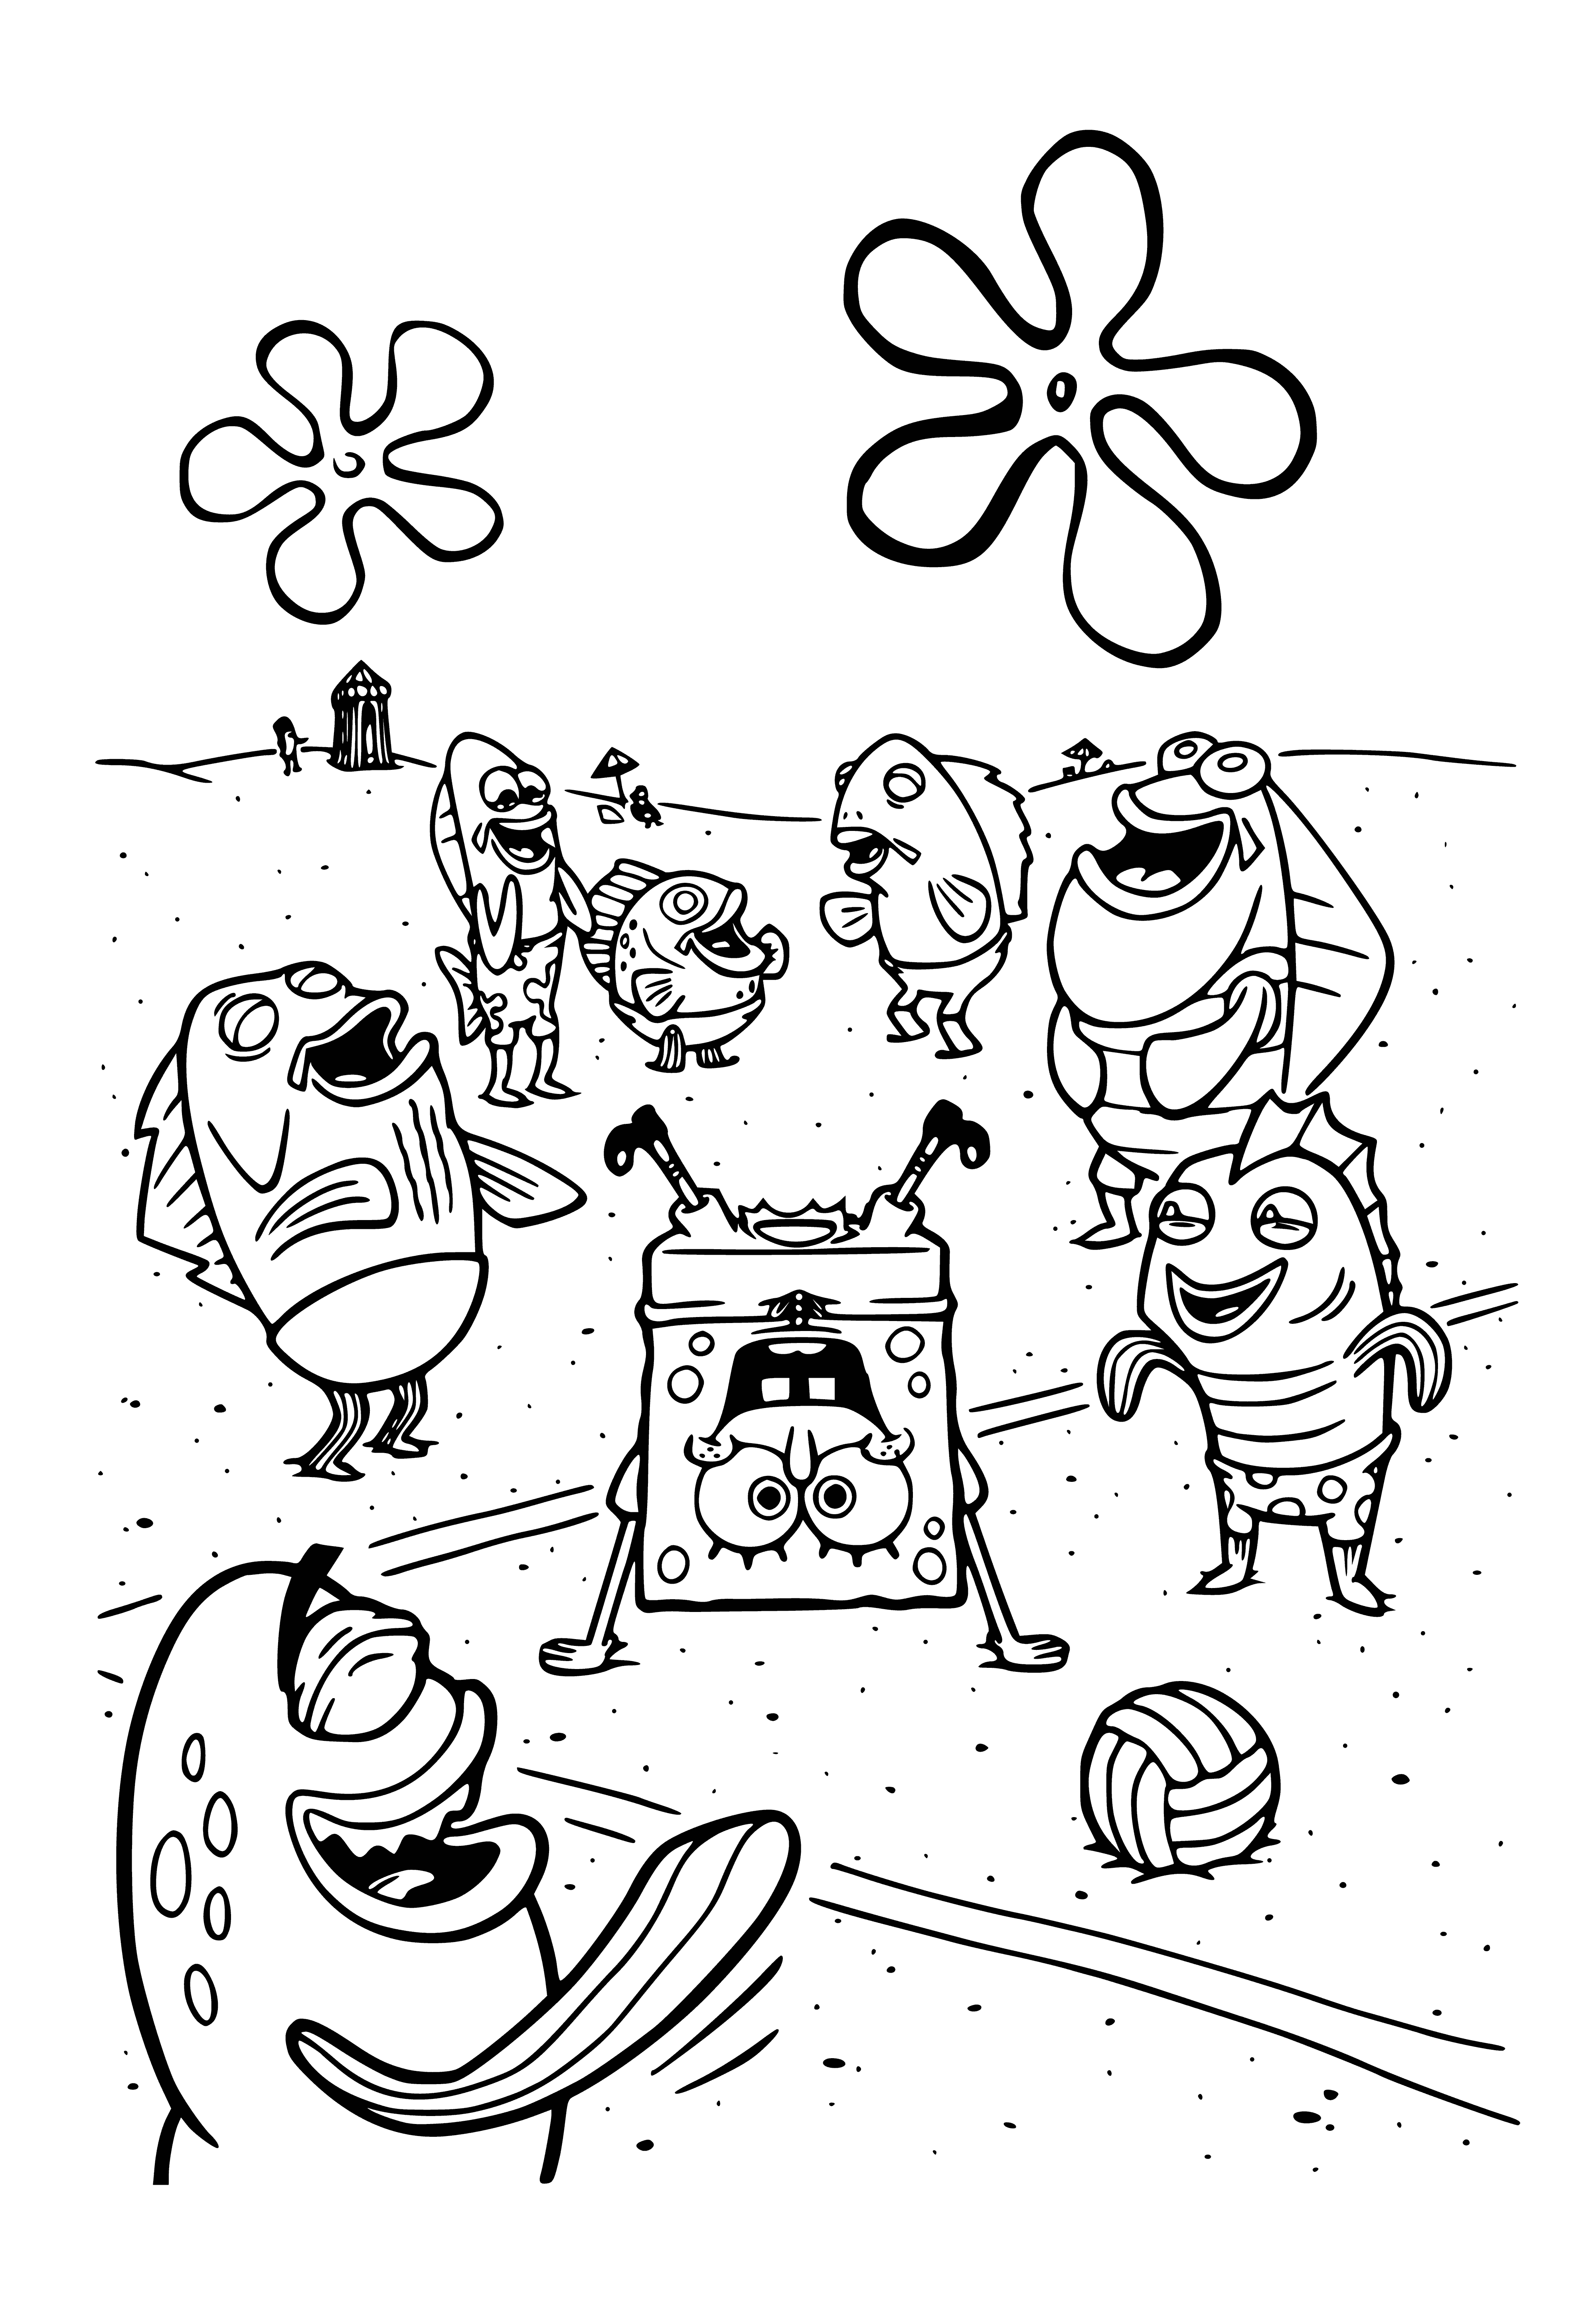 coloring page: A large yellow sponge & a small yellow fish relax on a sandy beach with smiles, enjoying a bright blue ocean & sky.